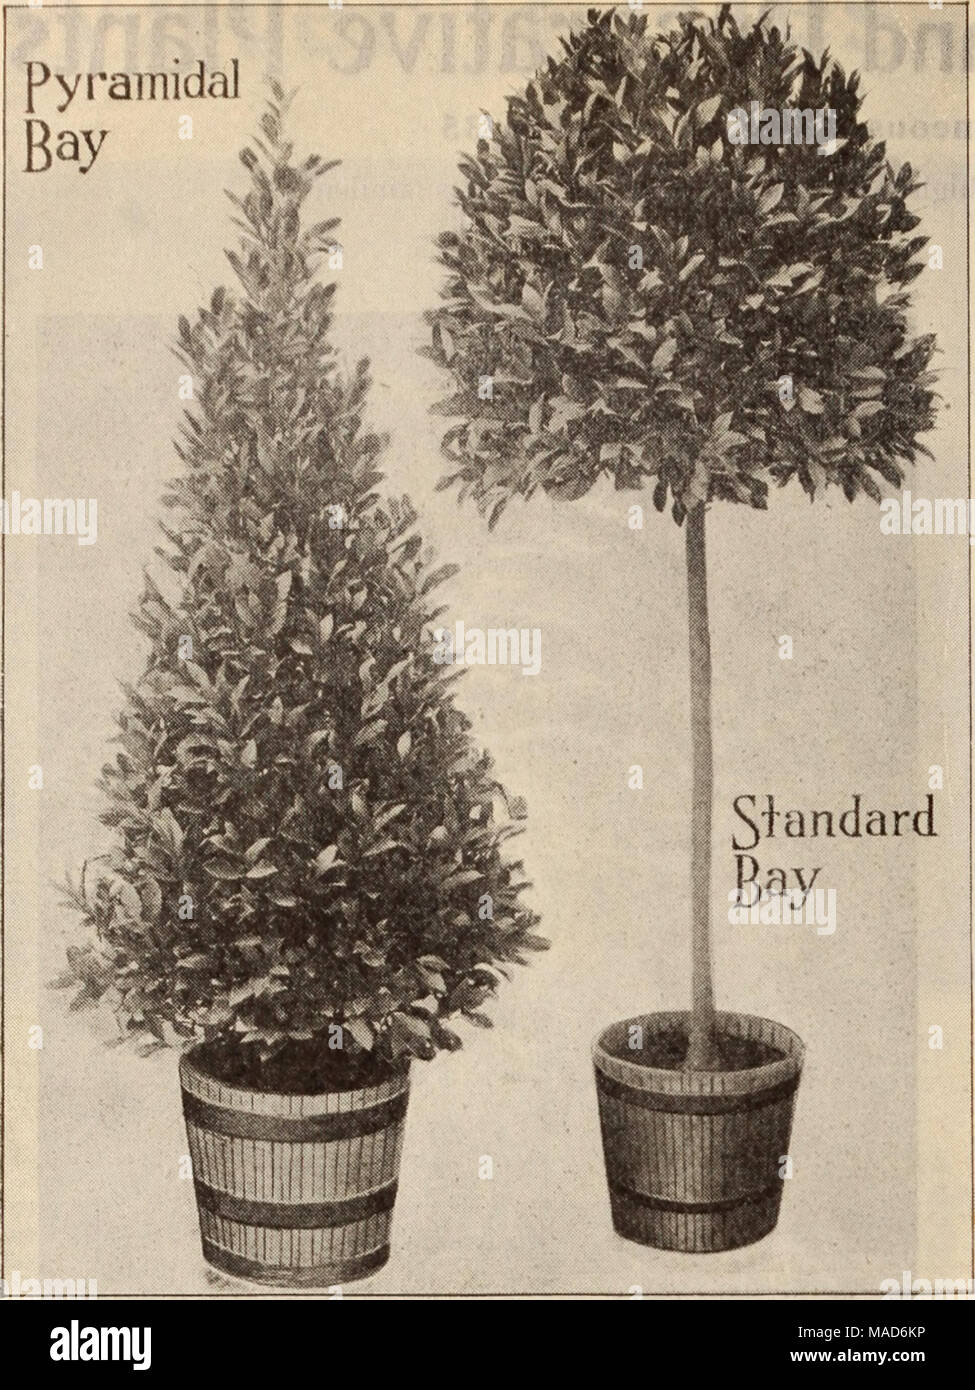 . Dreer's wholesale price list / Henry A. Dreer. . Bay Trees (Laurus Nobilis). An exceptionally fine lot of clean, dark-colored trees of unusual good values. Standard or Tree-Shaped. Stems 12 inches high, crowns &quot; 40 2V2 feet high S 15 inches in diam. 20 to 24 24 24 to 26 24 to 26 26 to 28 30 to 32 32 to 34 38 to 40 46 to 48 Pyramid-Shaped 16 to 18 inches diameter at base .22 to 24 &quot; . 26 to 28 &quot; 30 to 32 &quot; .32 to 34 &quot; . 34 to 36 &quot; Each $2 00 4 00 4 00 6 00 5 00 6 00 7 50 10 00 12 50 15 00 2 50 5 00 7 50 10 00 12 50 15 00 Boxwoods. Bush=shaped Box. A nice line of  Stock Photo